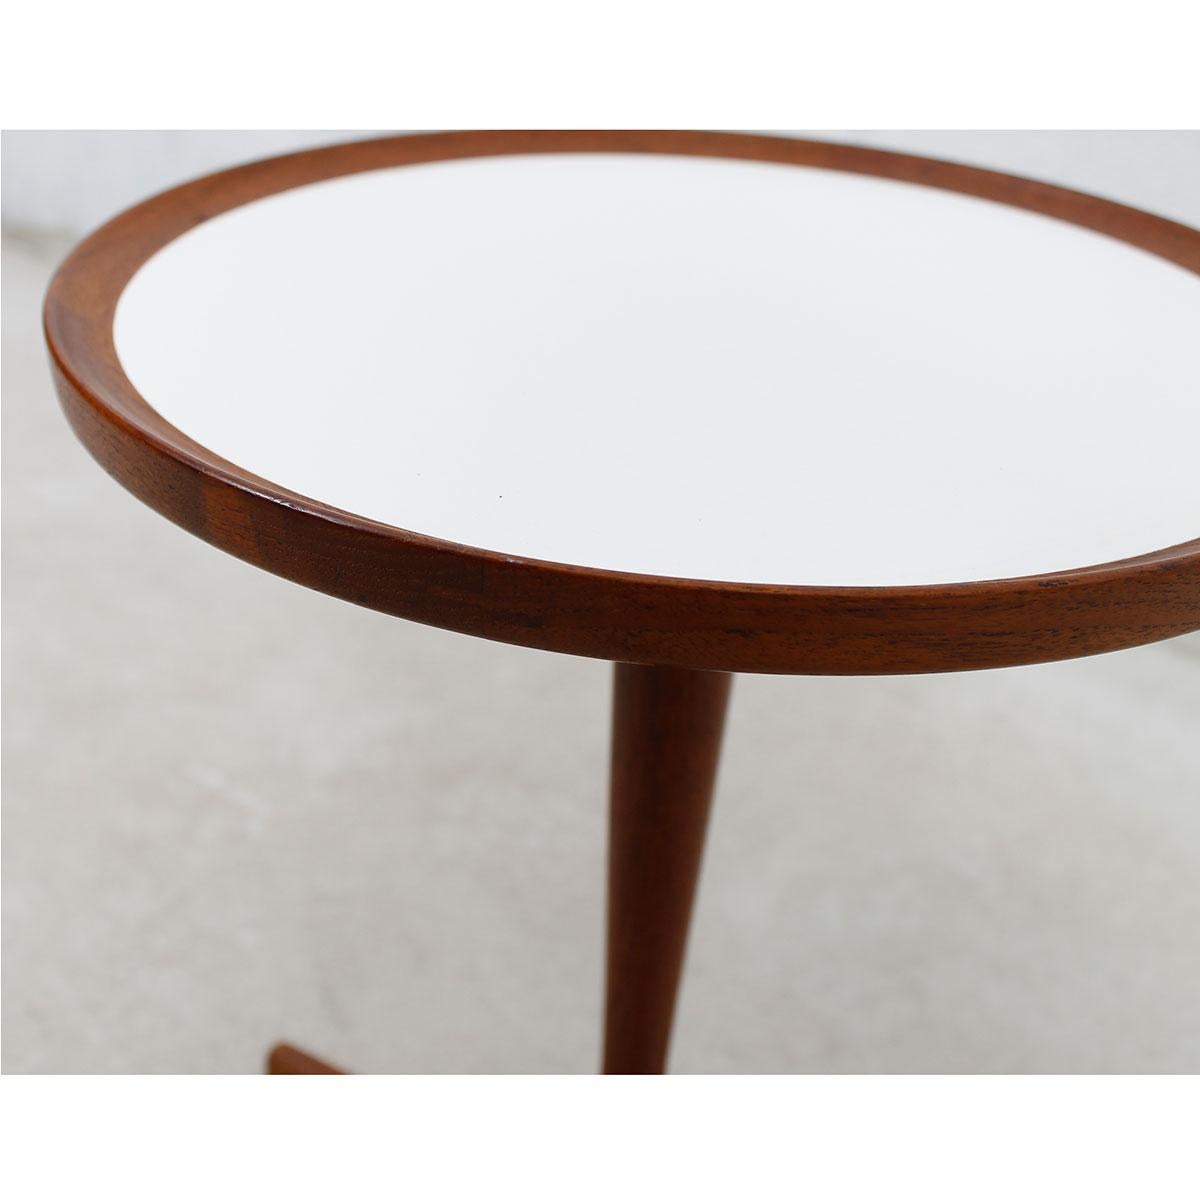 Hans C Andersen Accent / Cocktail Table

Additional information:
Material: Teak
Featured at DC:
Wonderful petite round side table by Hans Andersen, Denmark.
Teak Pedestal and tripod base with white inlay.
Fabulous in Mid-Century,